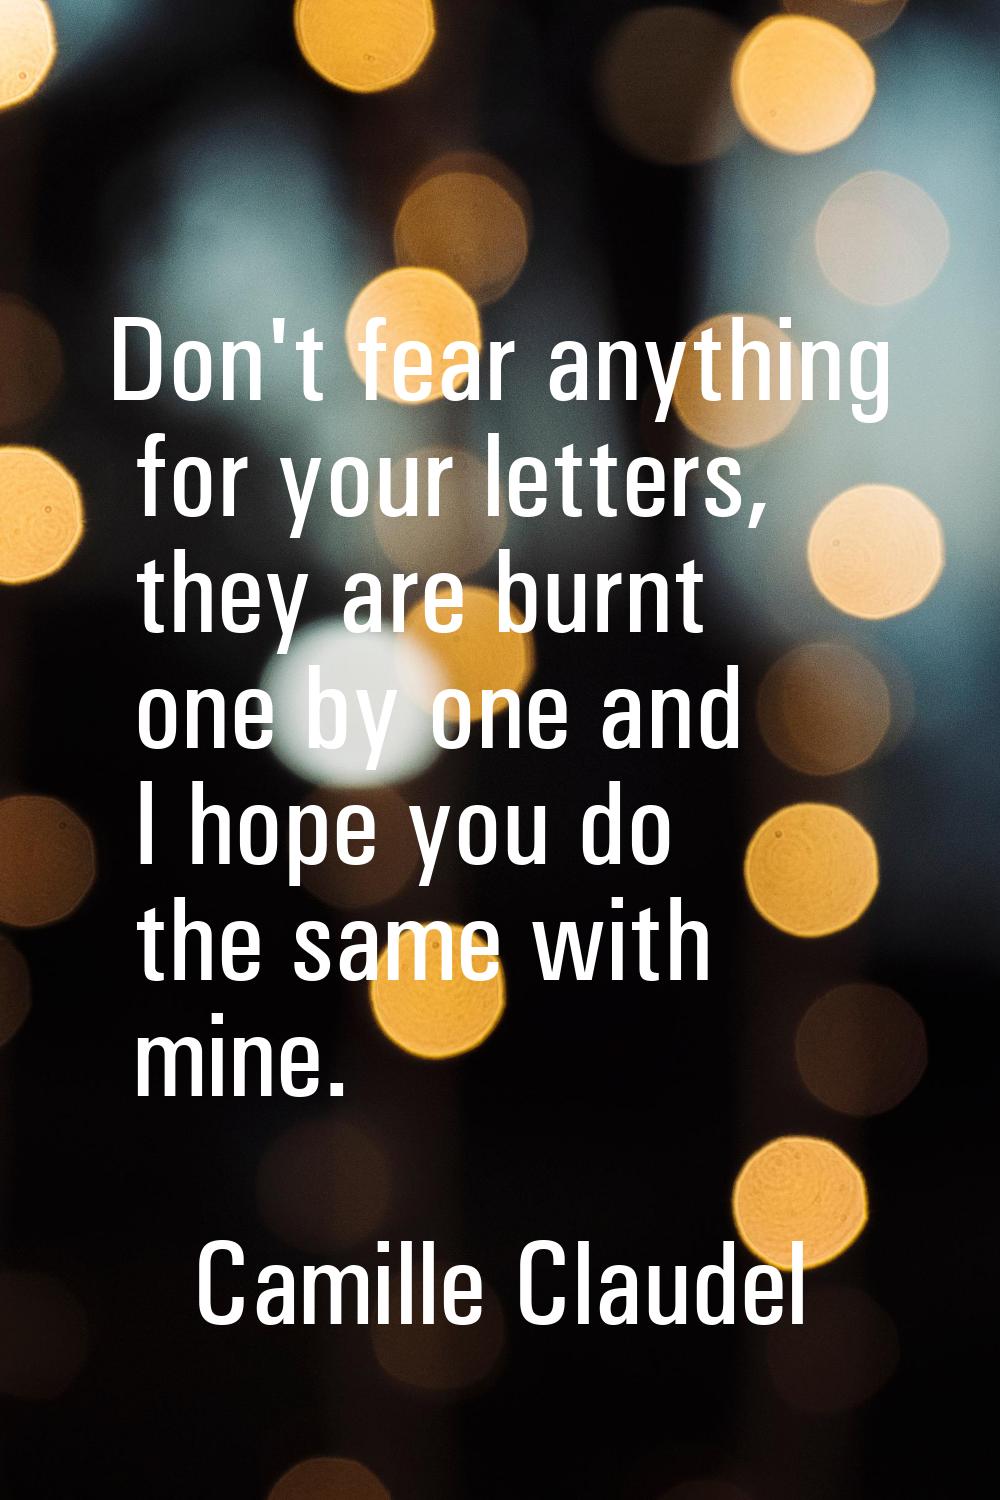 Don't fear anything for your letters, they are burnt one by one and I hope you do the same with min